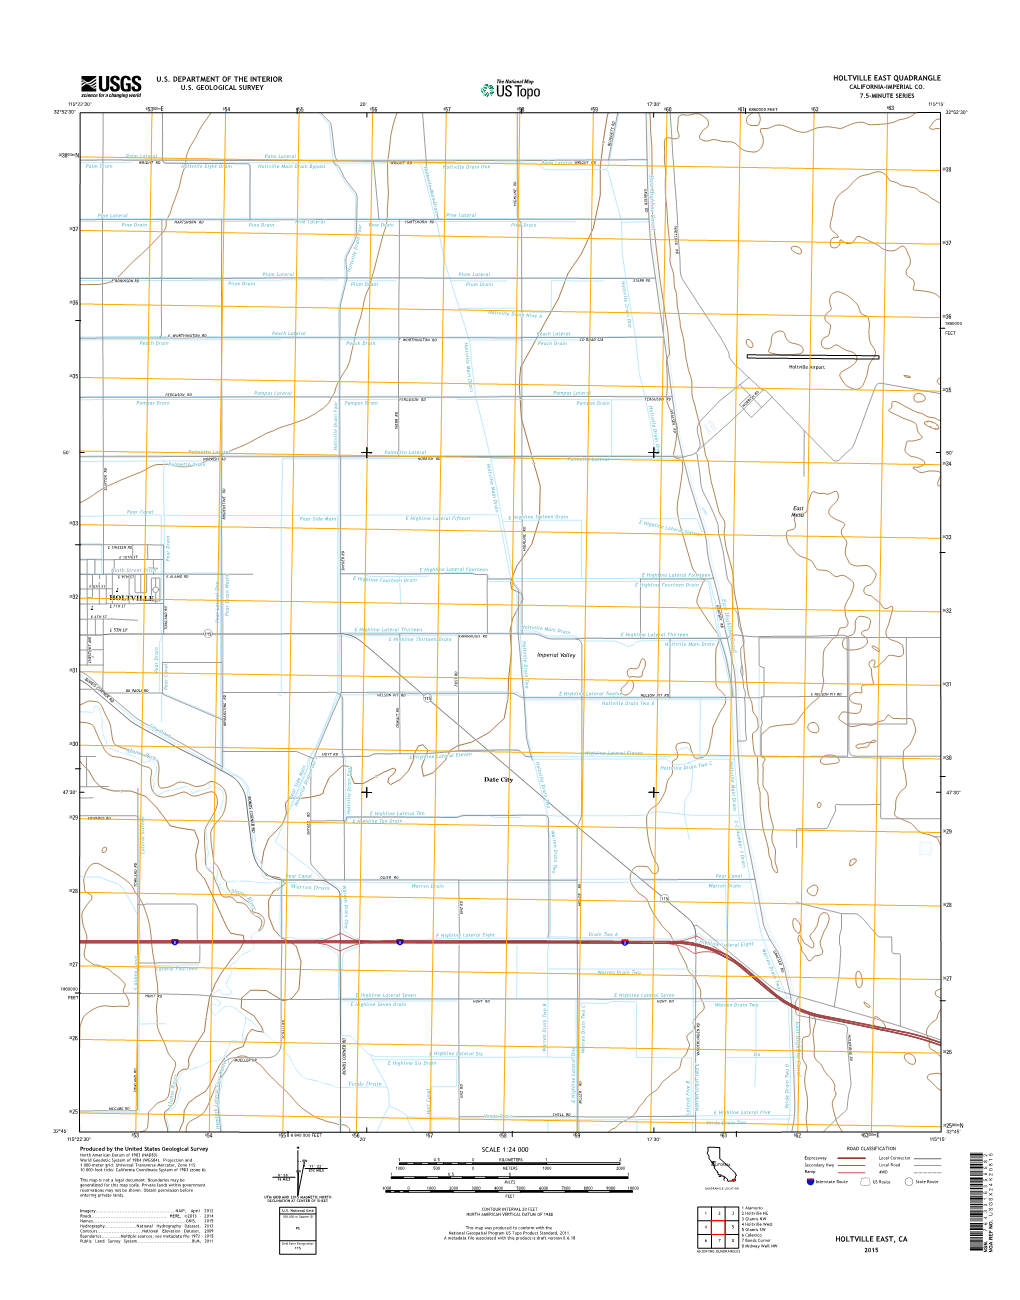 USGS 7.5-Minute Image Map for Holtville East, California